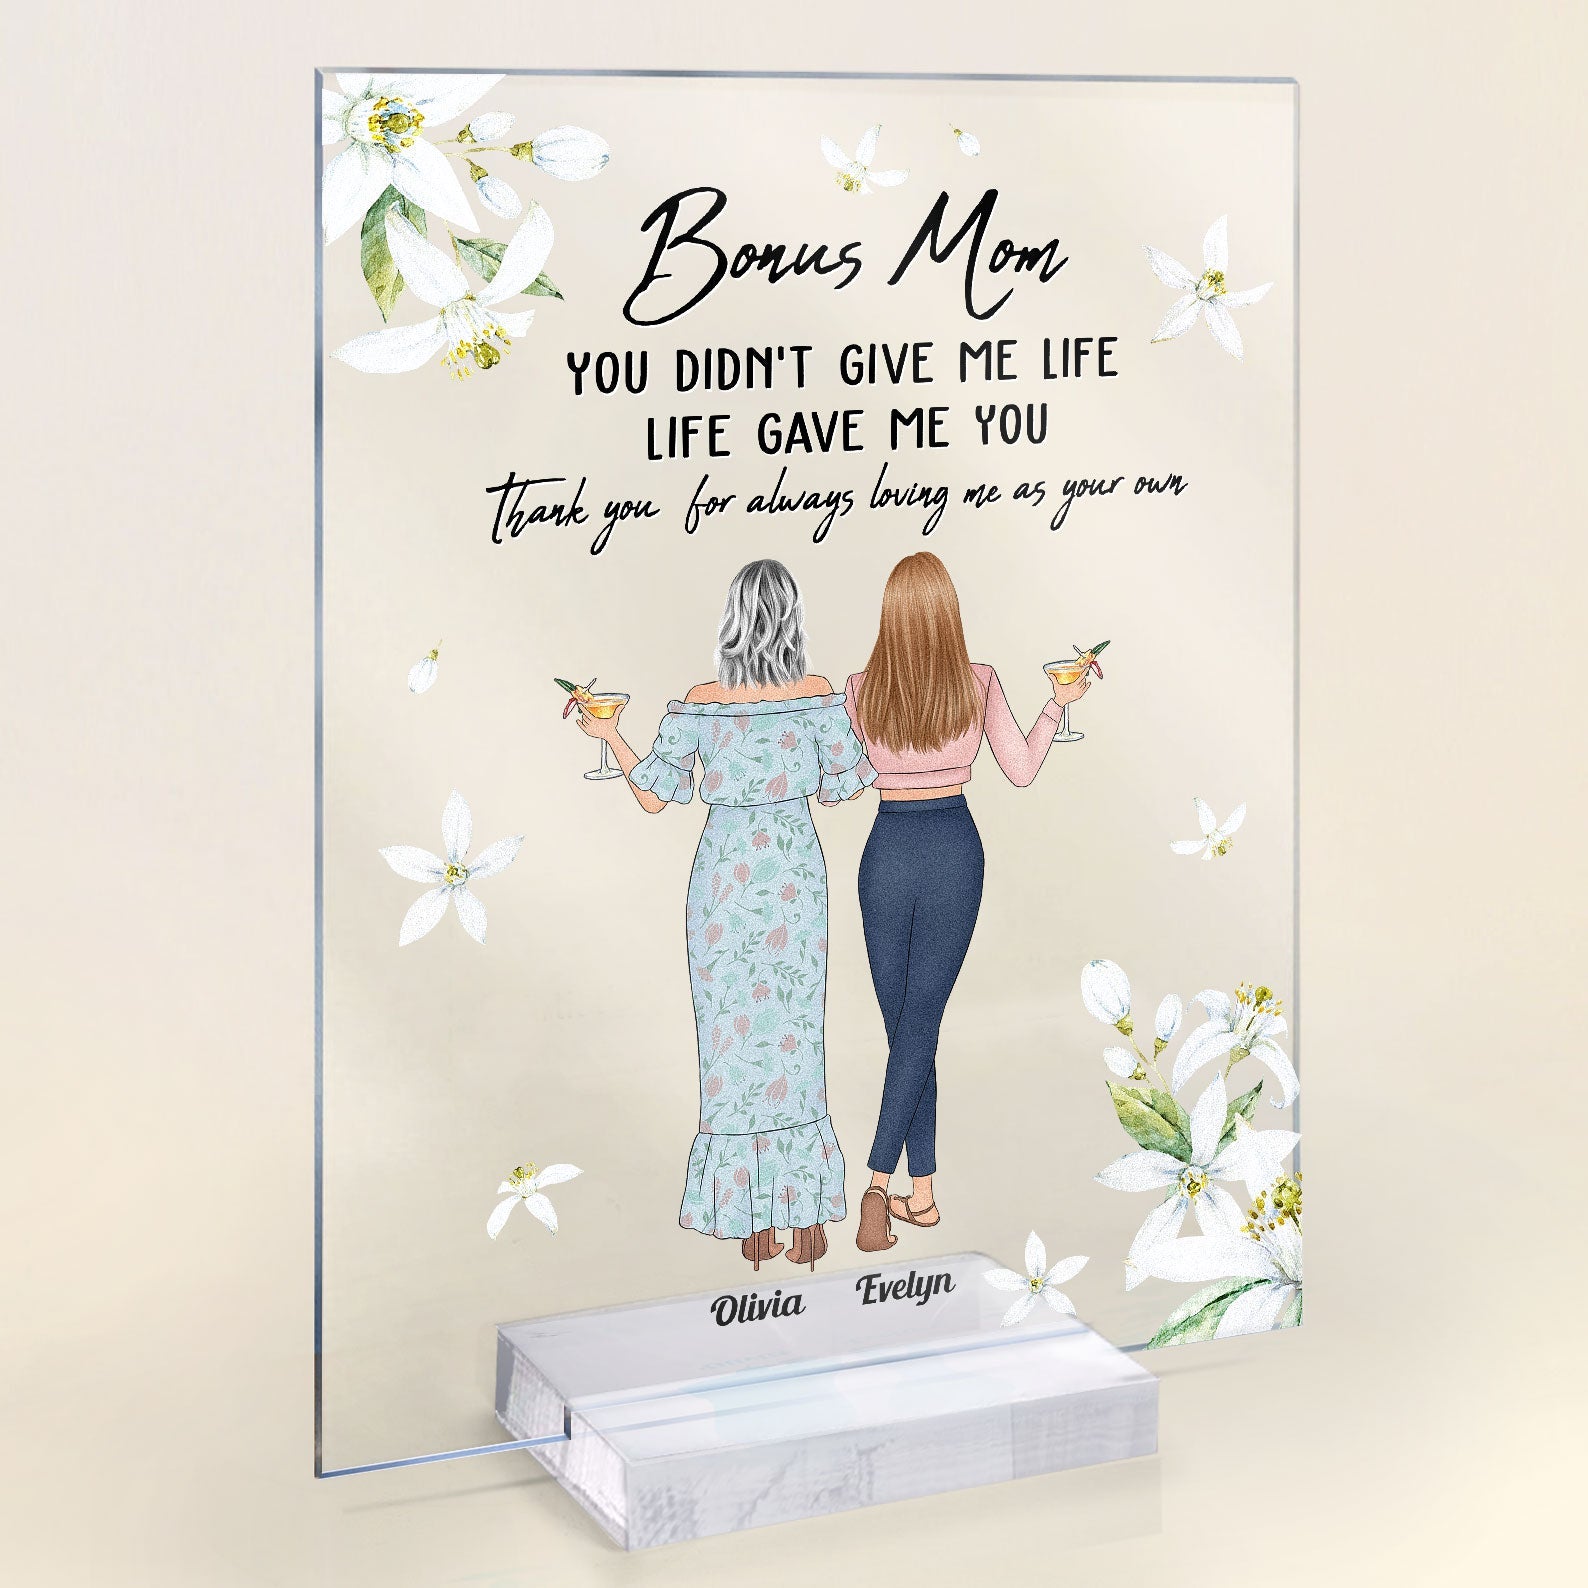 http://macorner.co/cdn/shop/products/You-DidnT-Give-Me-LifeLife-Gave-Me-You-Personalized-Acrylic-Plaque-Mothers-Day--BirthdayGift-For-Step-Mom-Bonus-Mom-Step-Mother-1.jpg?v=1649922099